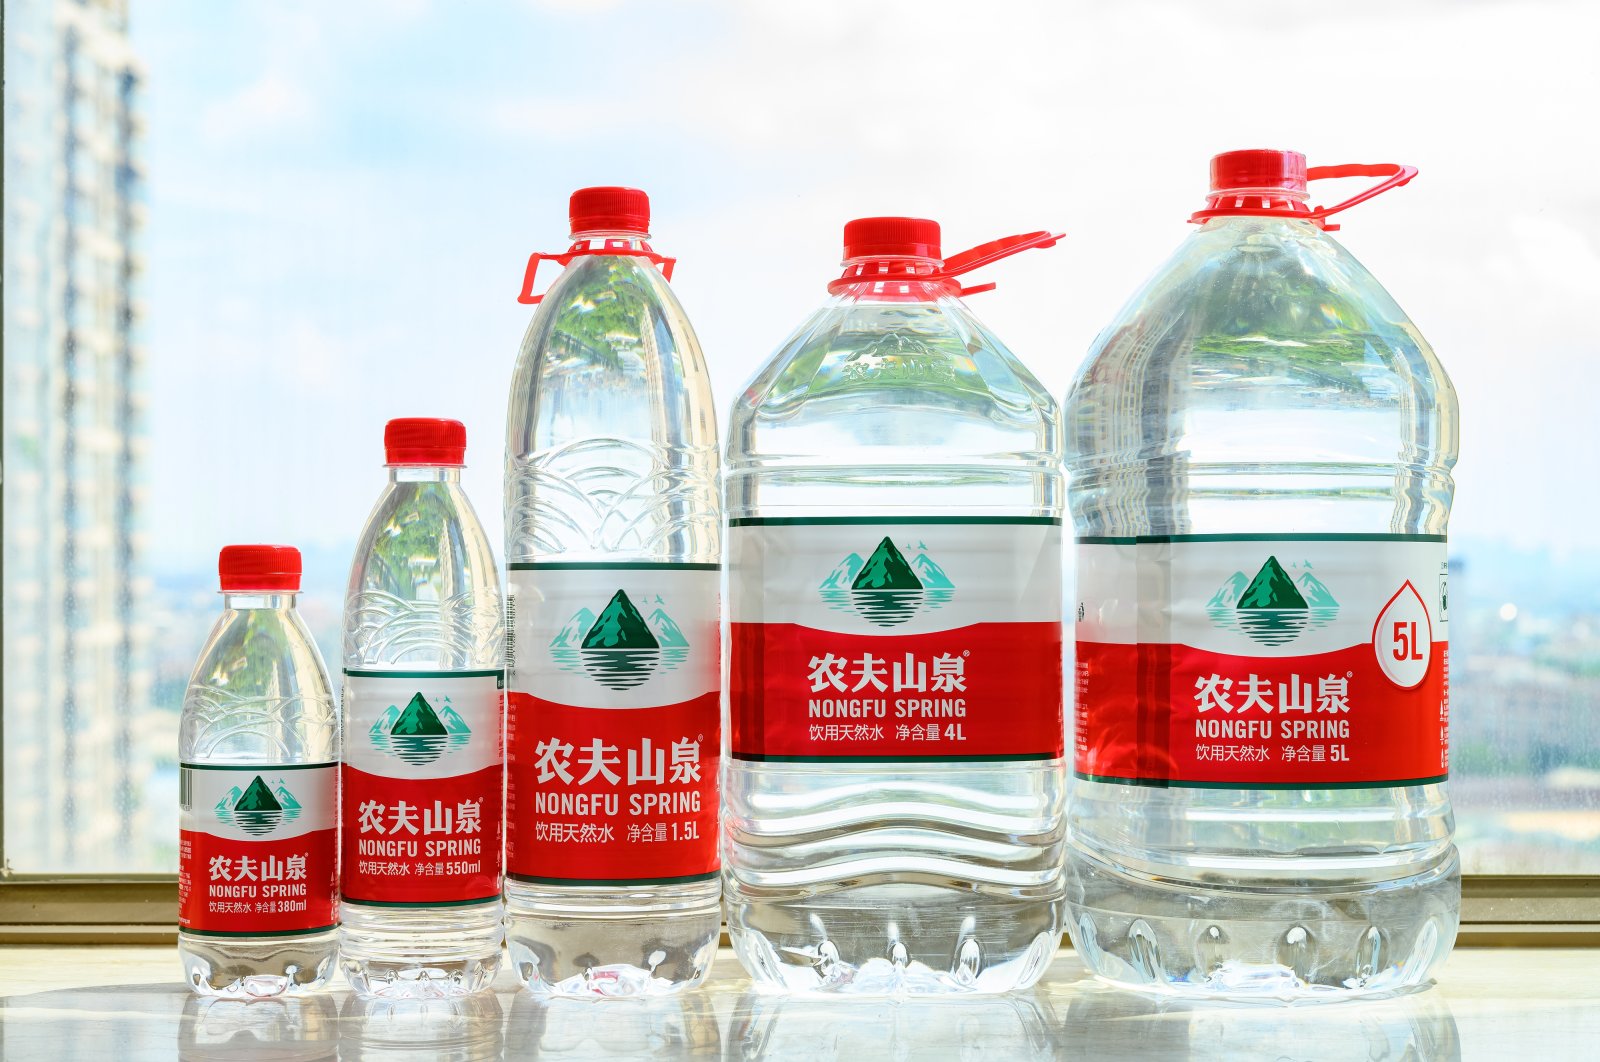 This illustration show bottles of Nongfu Spring water from small to large, Sept. 10,2020, Zhongshan, Guangdong, China (Shutterstock Photo).